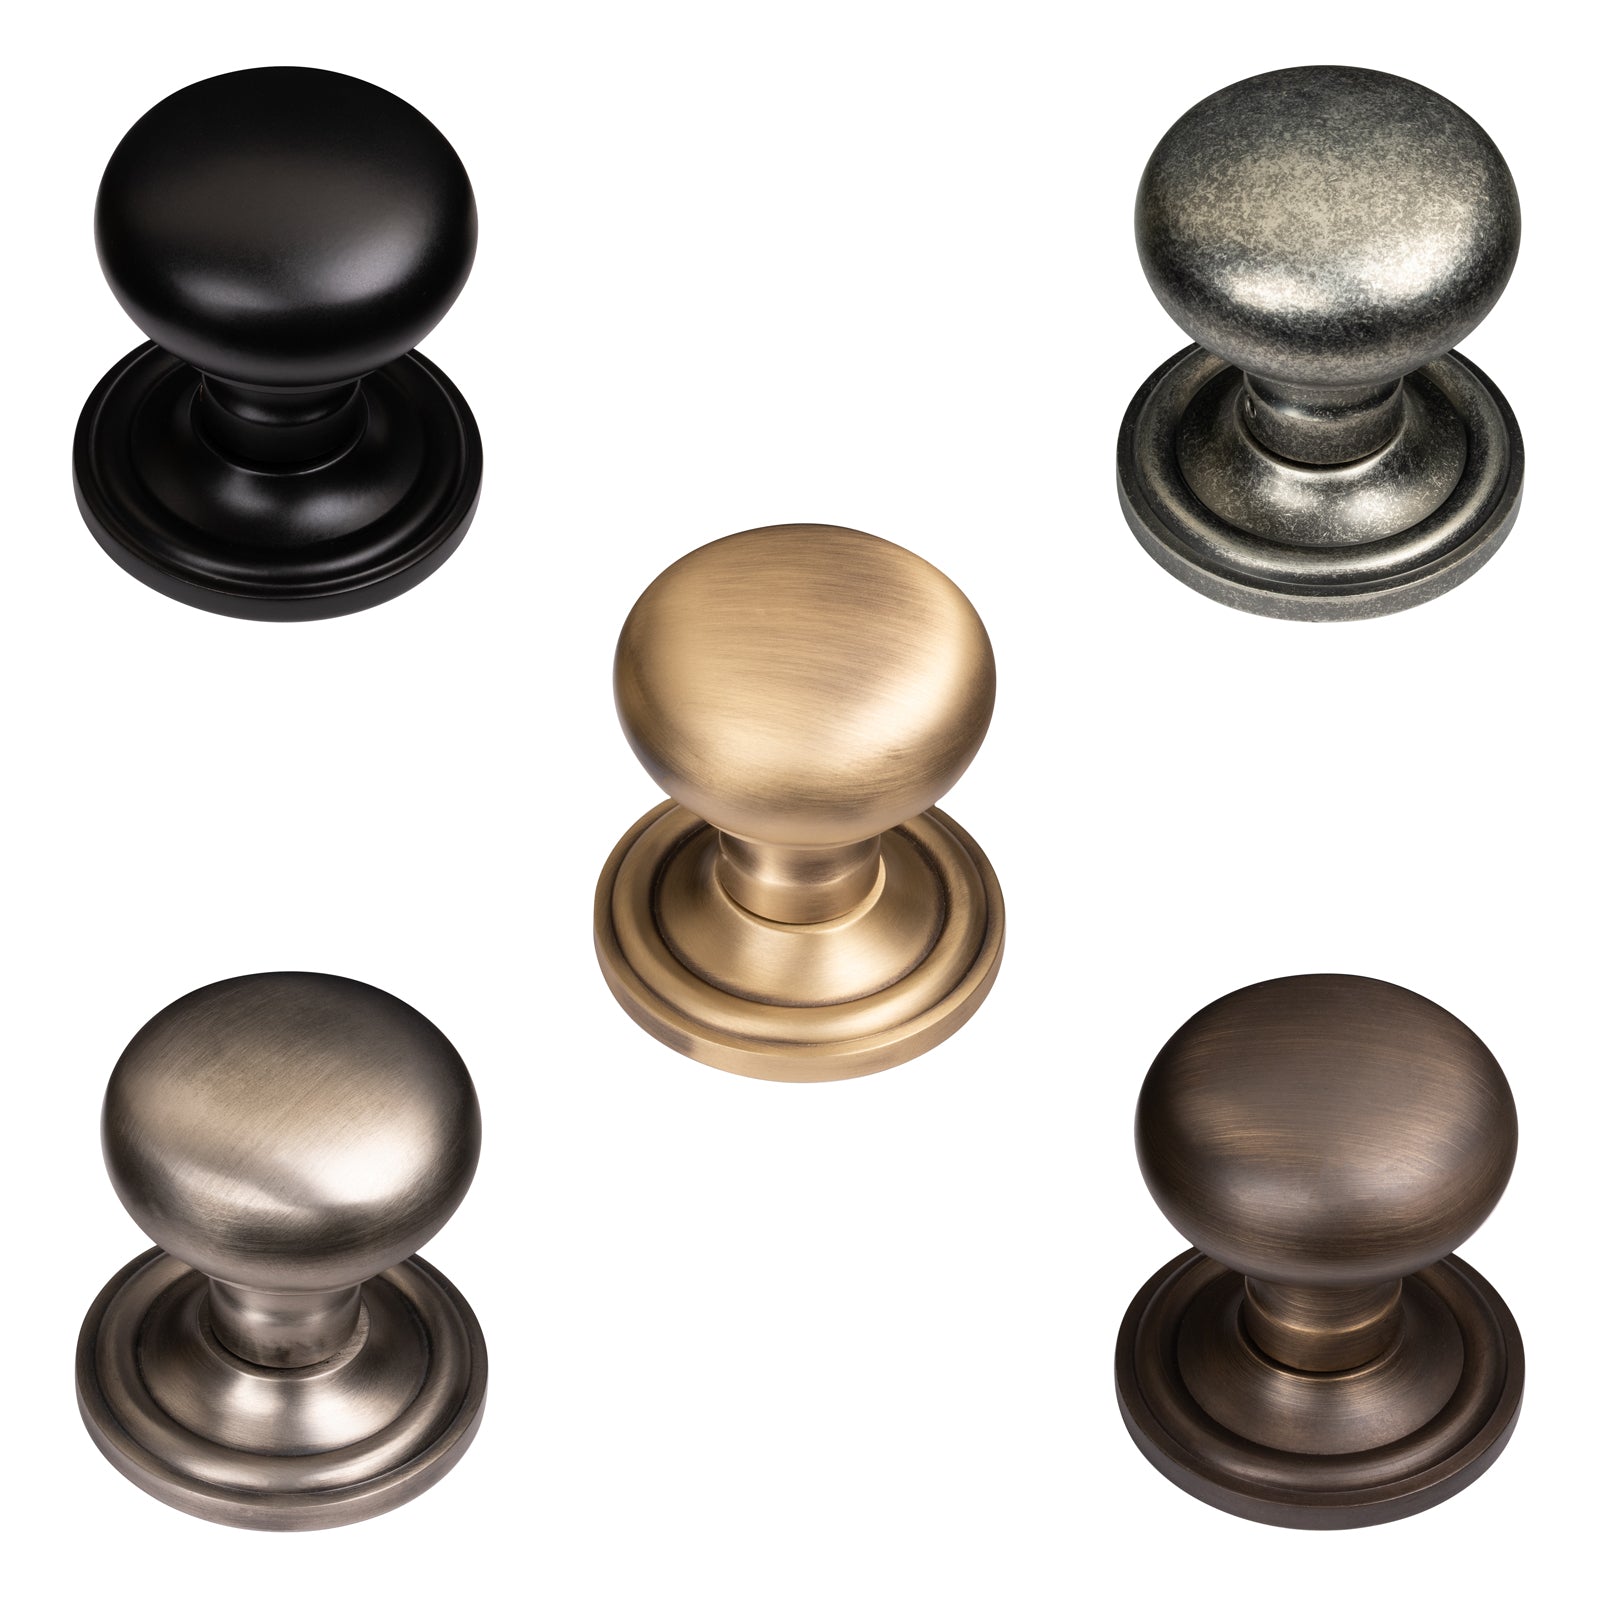 Solid Brass Mushroom Door Knobs Old English Collection